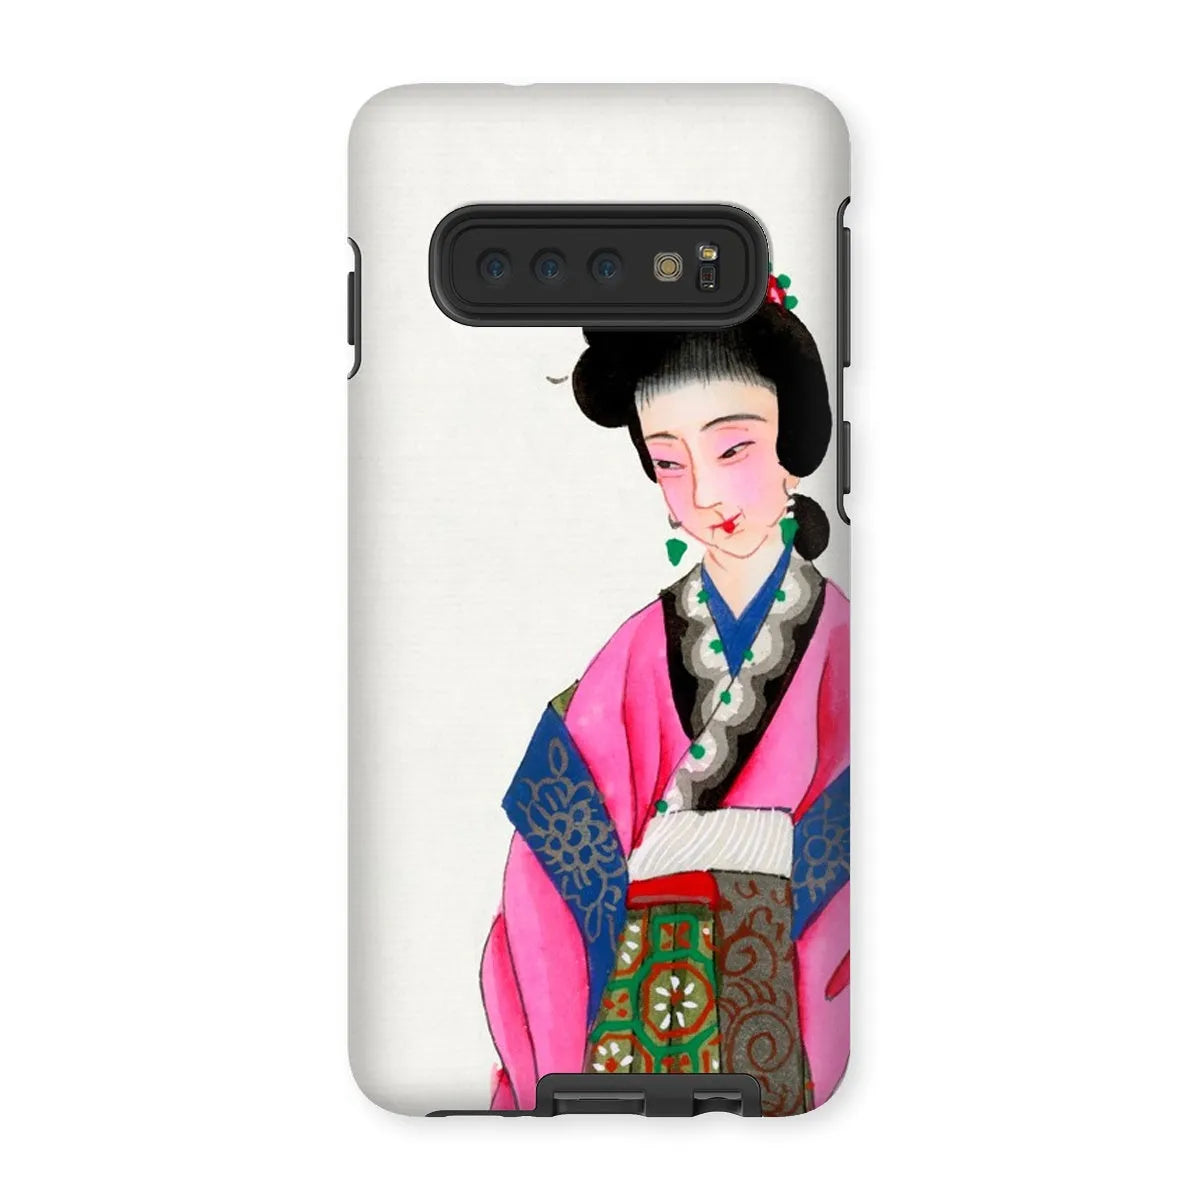 Noblewoman - Chinese Aesthetic Manchu Art Phone Case - Samsung Galaxy S10 / Matte - Mobile Phone Cases - Aesthetic Art